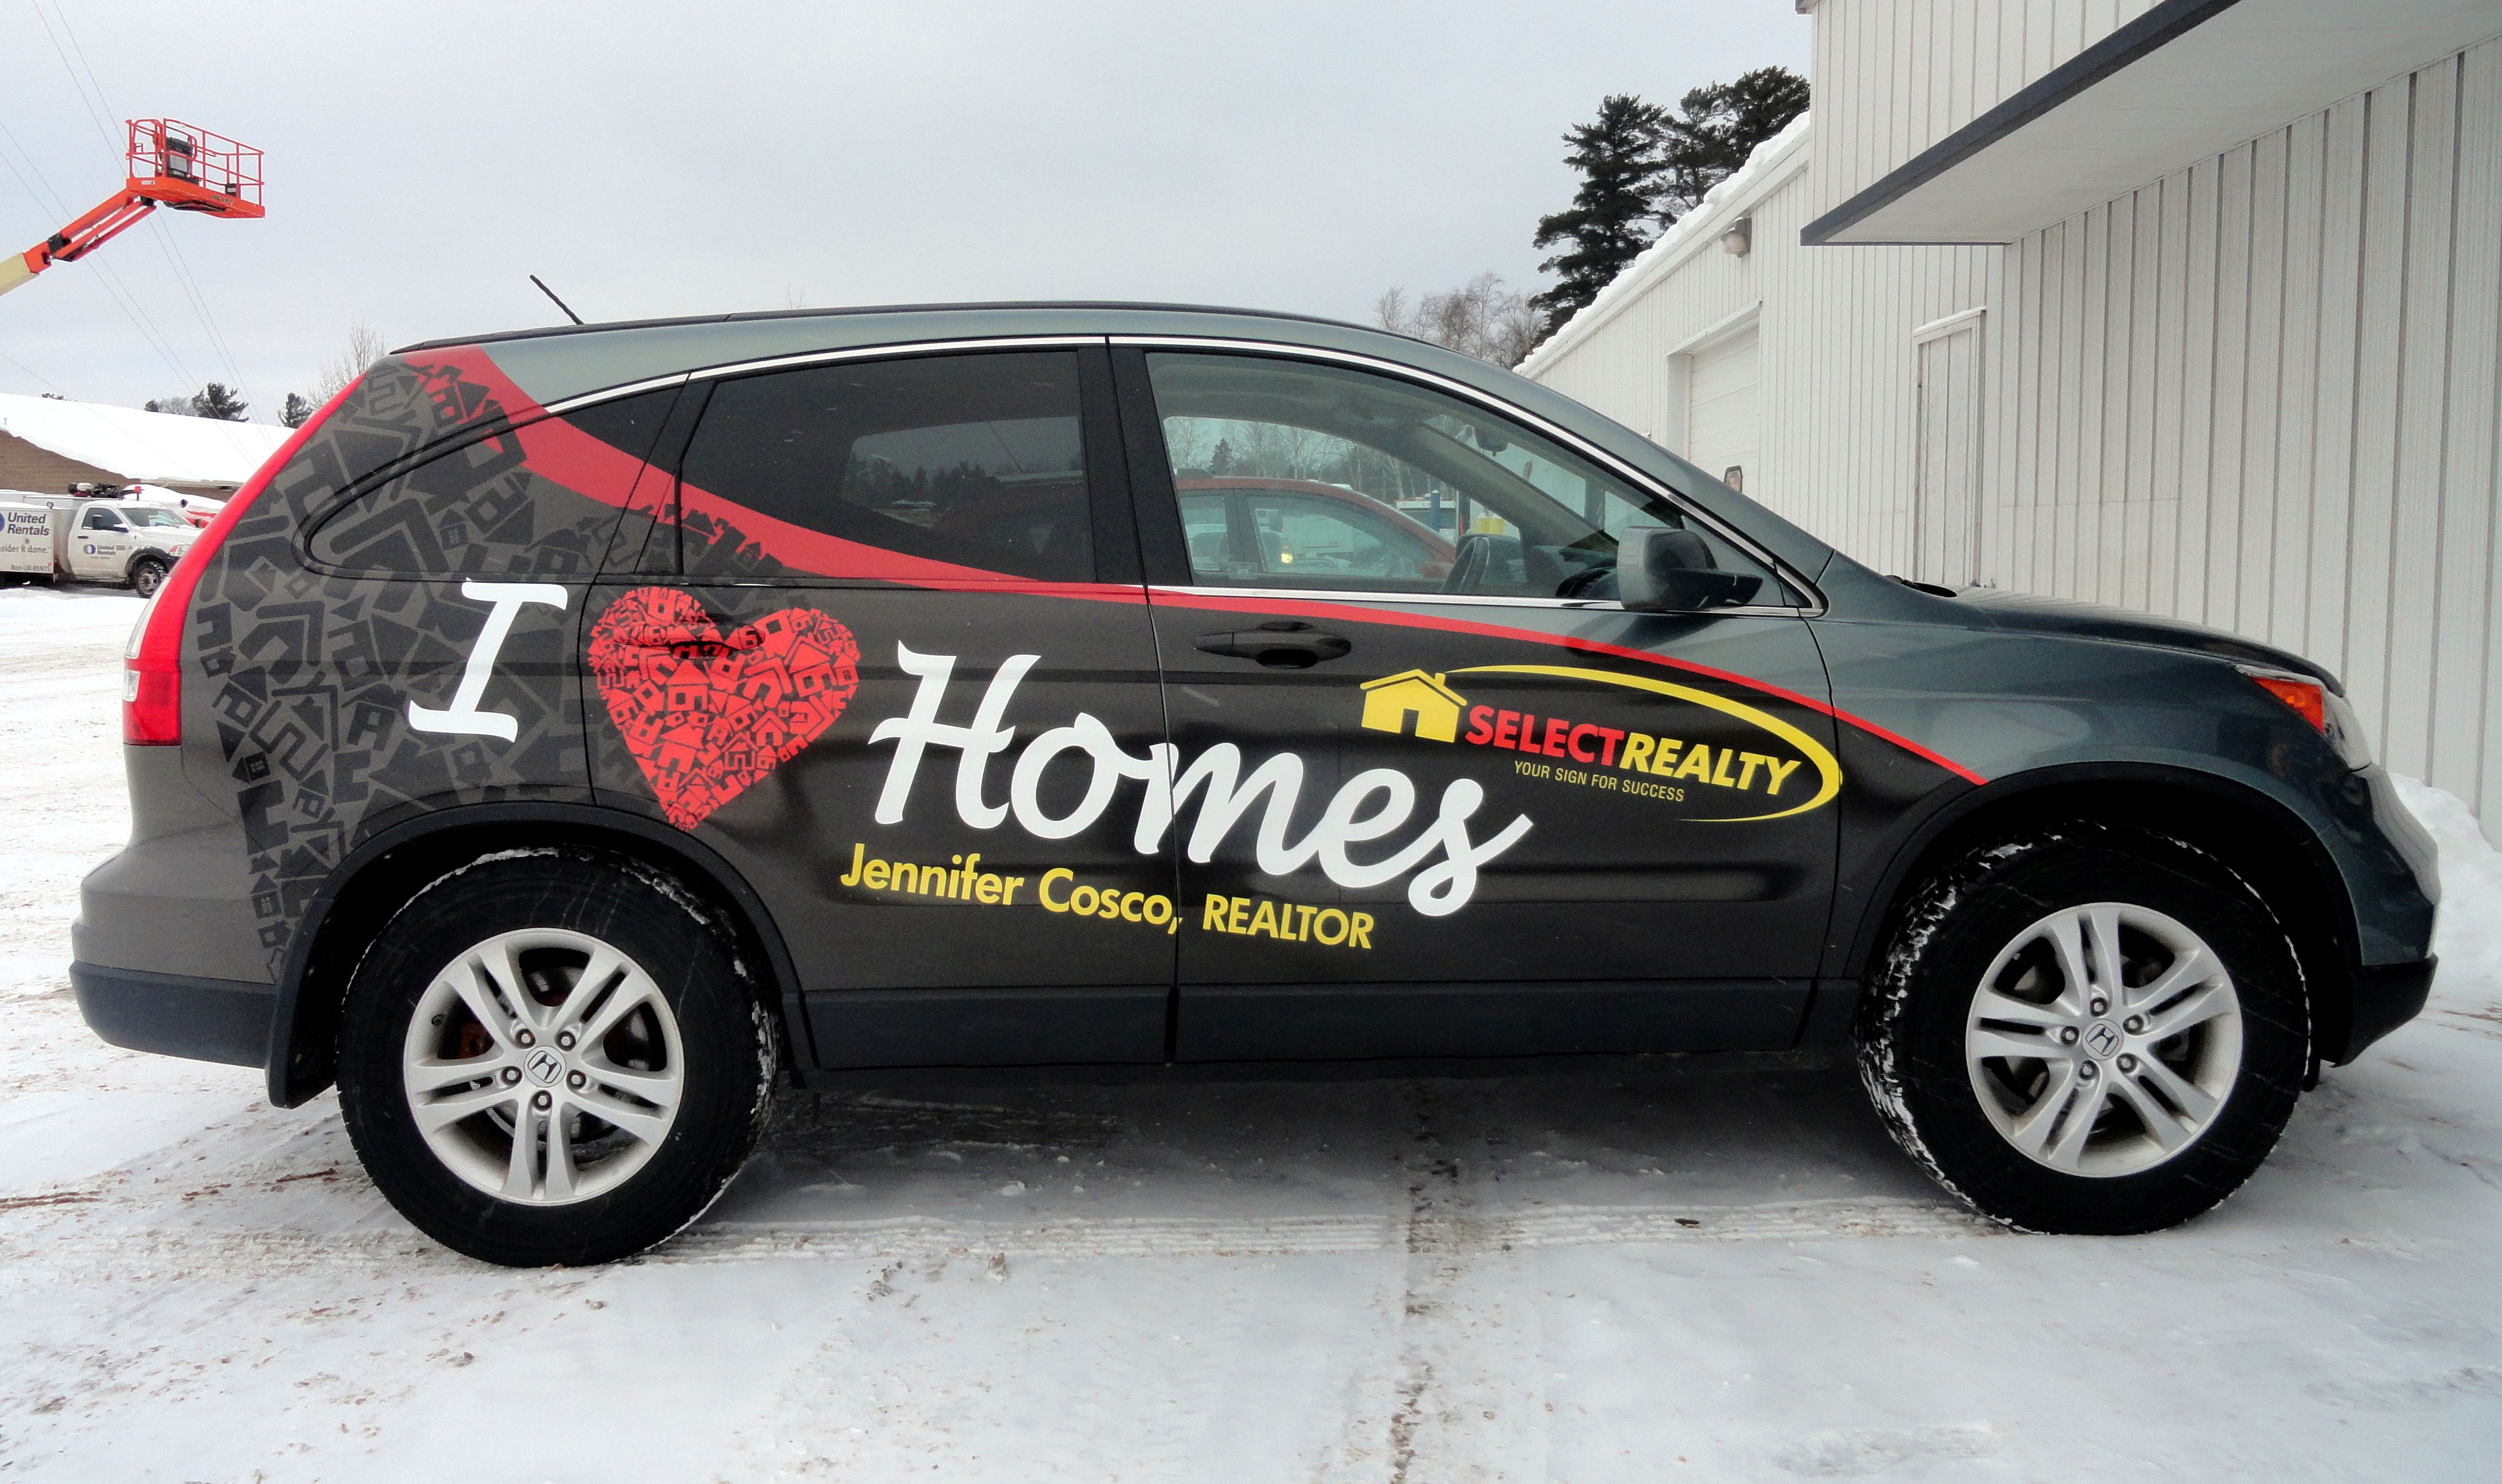 Vehicle with custom graphics and lettering